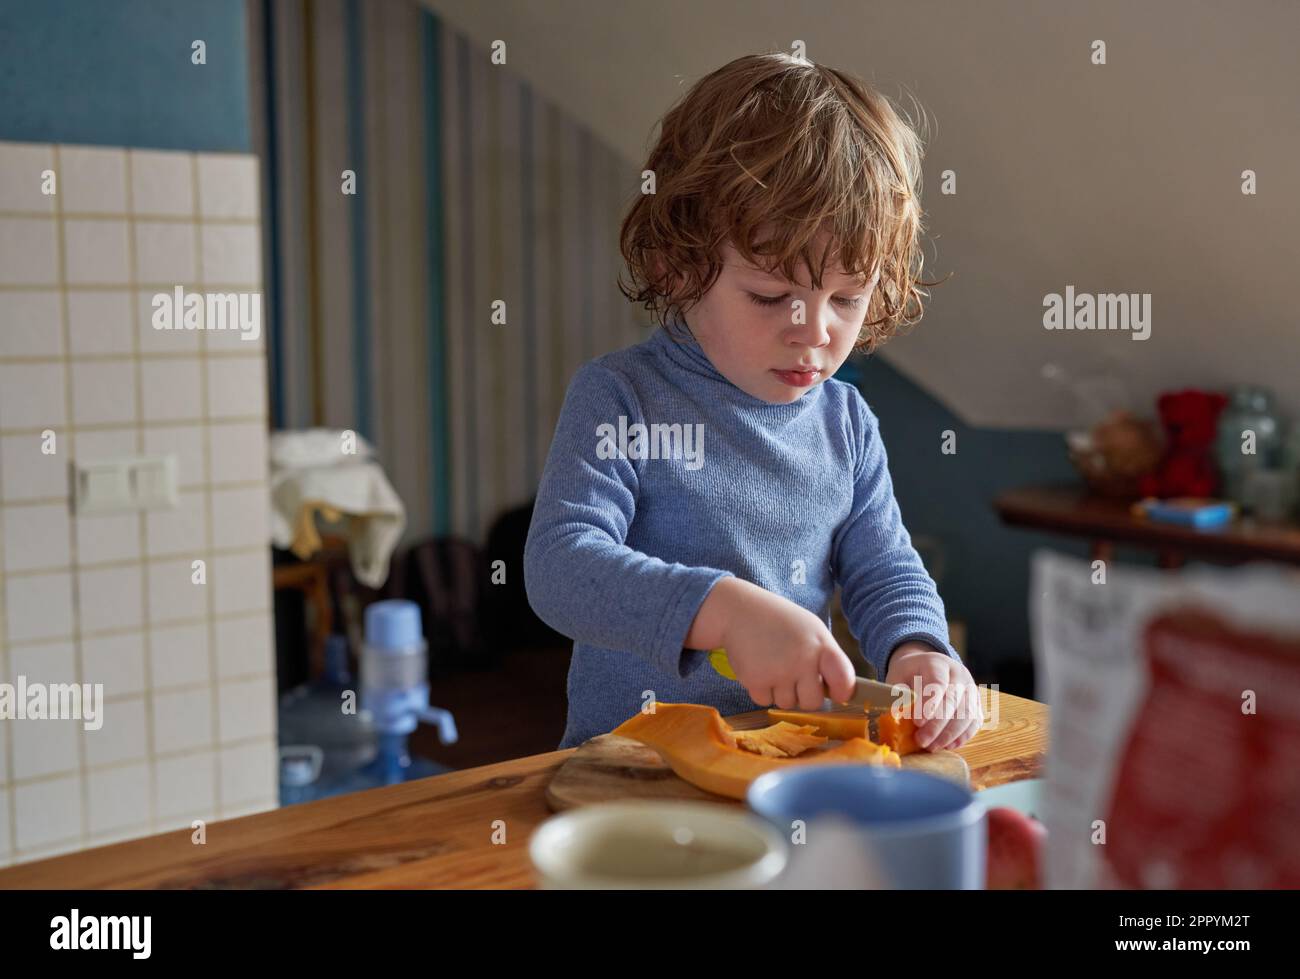 A little boy works in the kitchen, he cuts a pumpkin Stock Photo